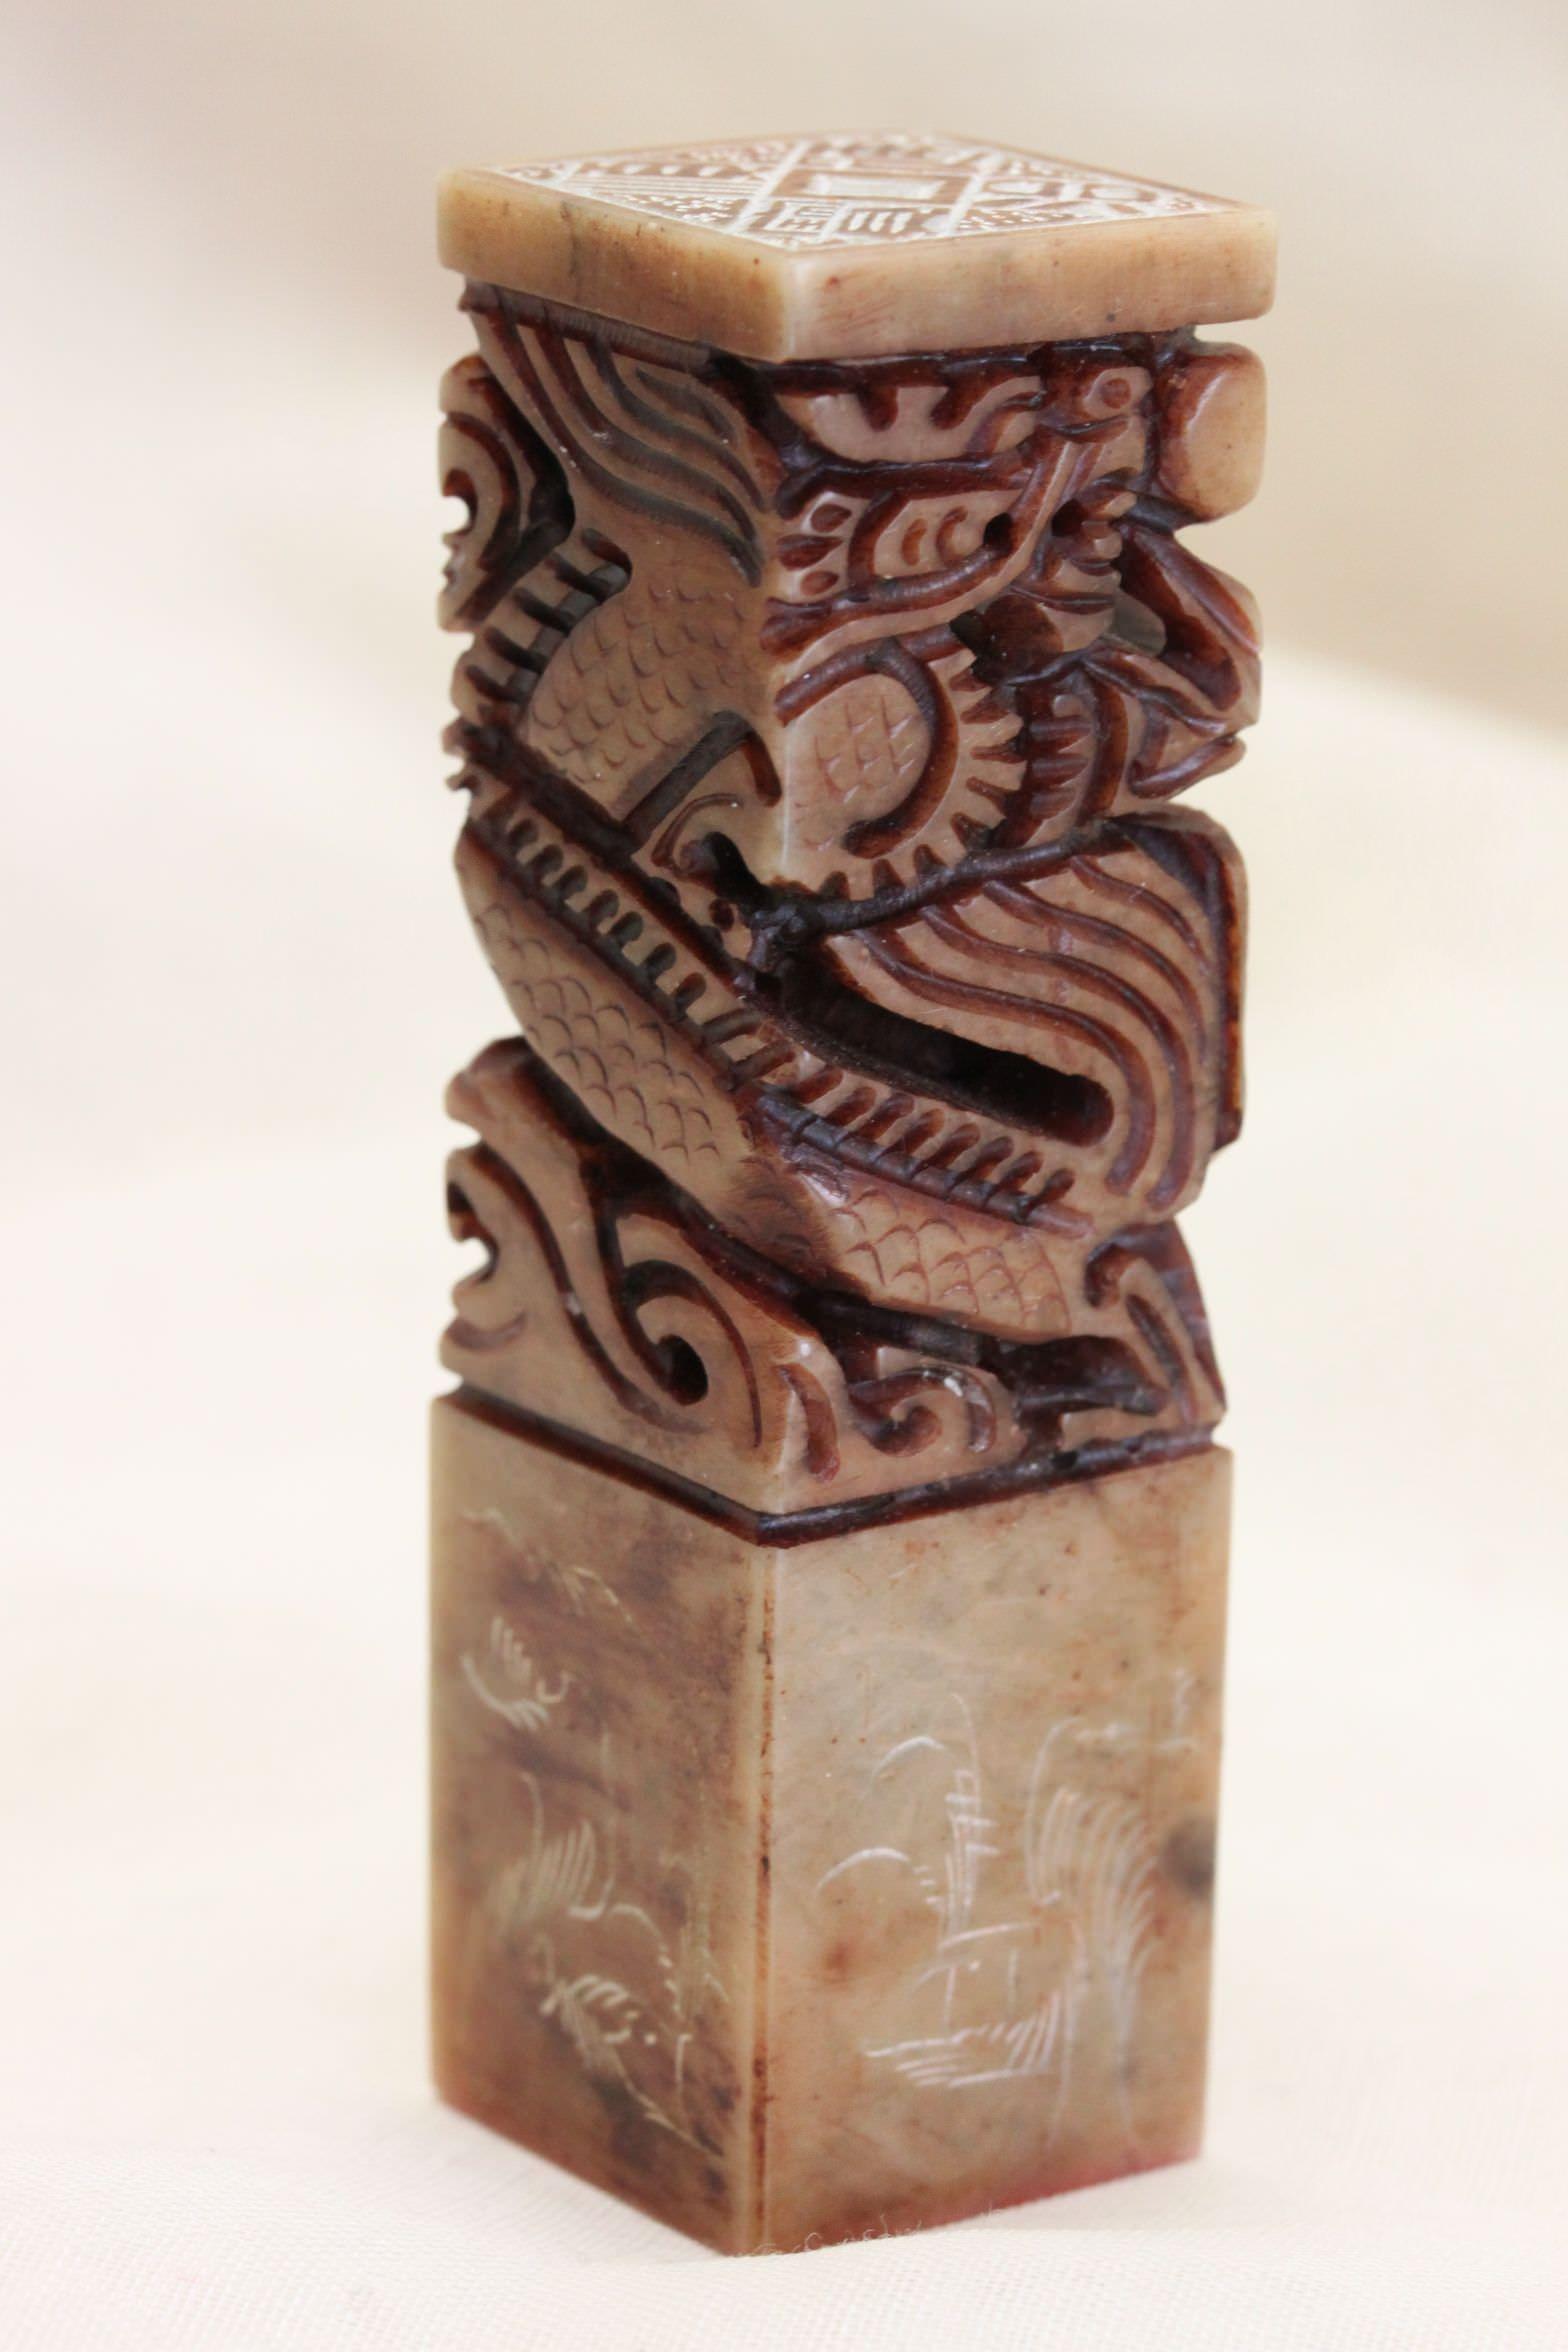 This Chinese carved soapstone seal features carving on all sides. The main carving is of a dragon, deeply cut and encircling the piece. Below the dragon are feather or fern like decorations and some Chinese characters in a circle. The top is carved